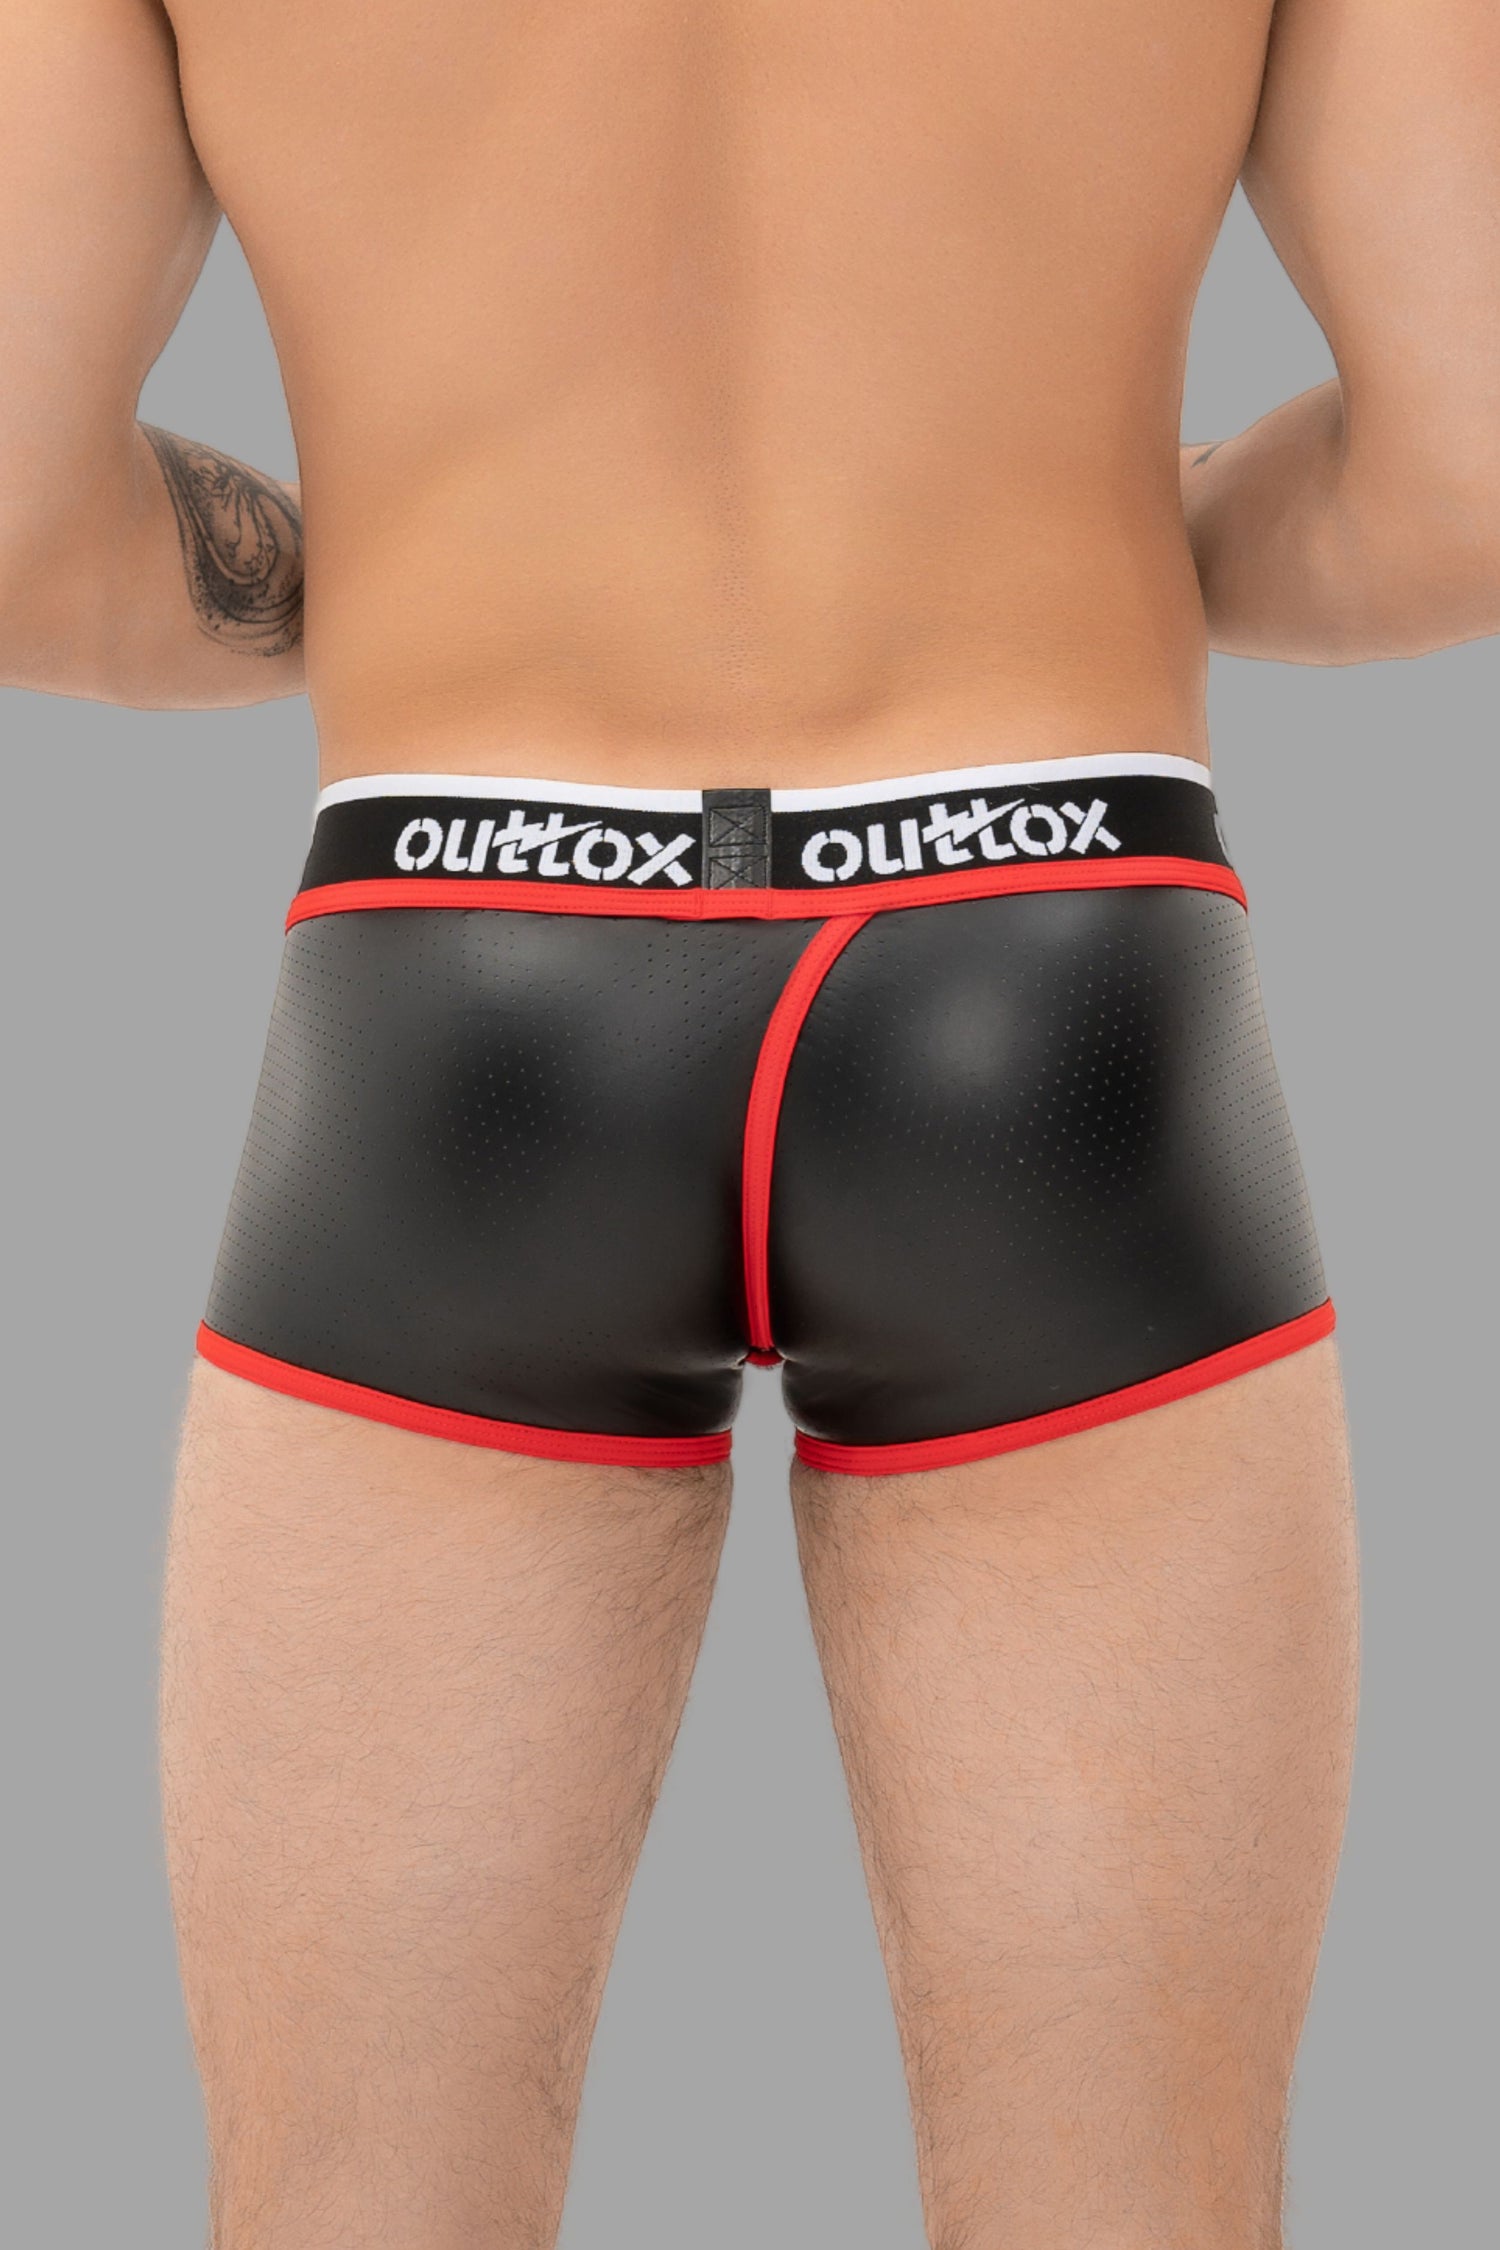 Outtox. Wrapped Rear Trunk Shorts with Snap Codpiece. Black+Red